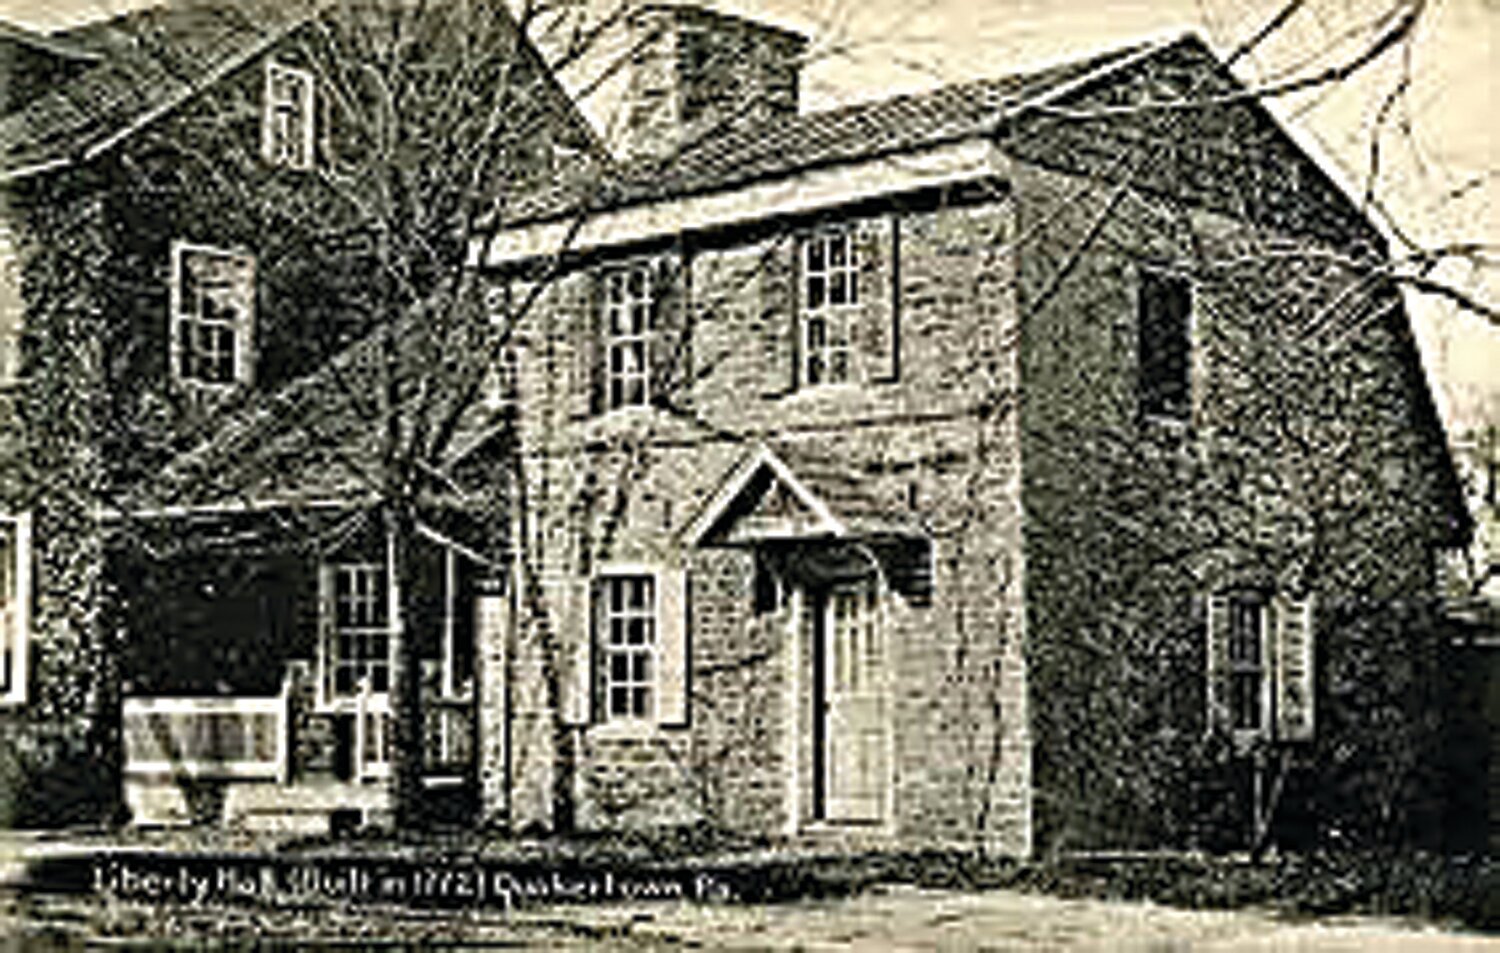 Liberty Hall was built on West Broad Street in 1772 and got its name because what would later be named the Liberty Bell was kept safe there on Sept. 23, 1777.